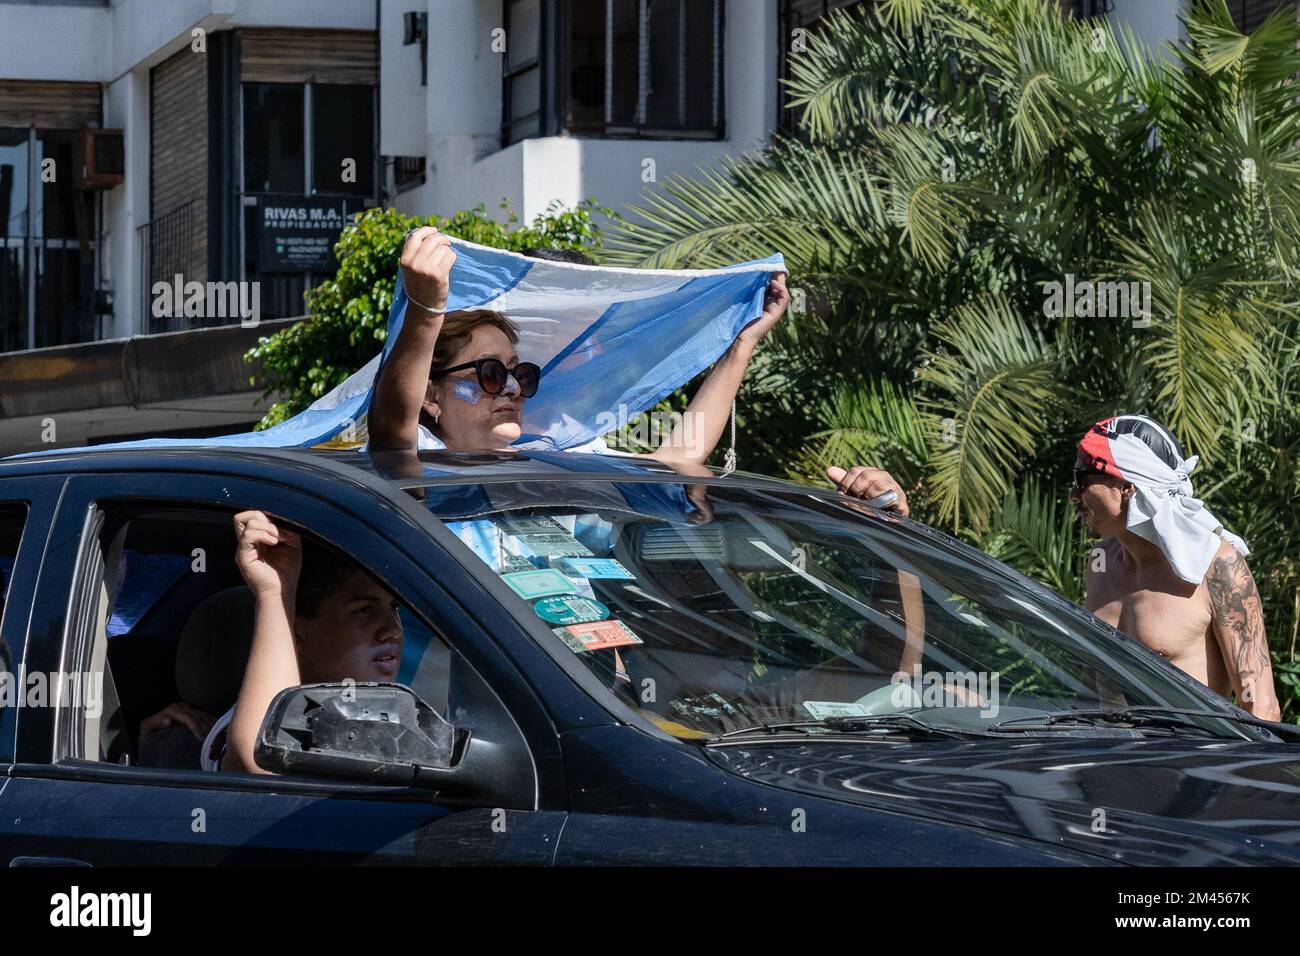 La Plata, Buenos Aires, Argentina - December 18, 2022: Fans celebrate Argentina winning the 2022 FIFA World Cup in Qatar. Stock Photo